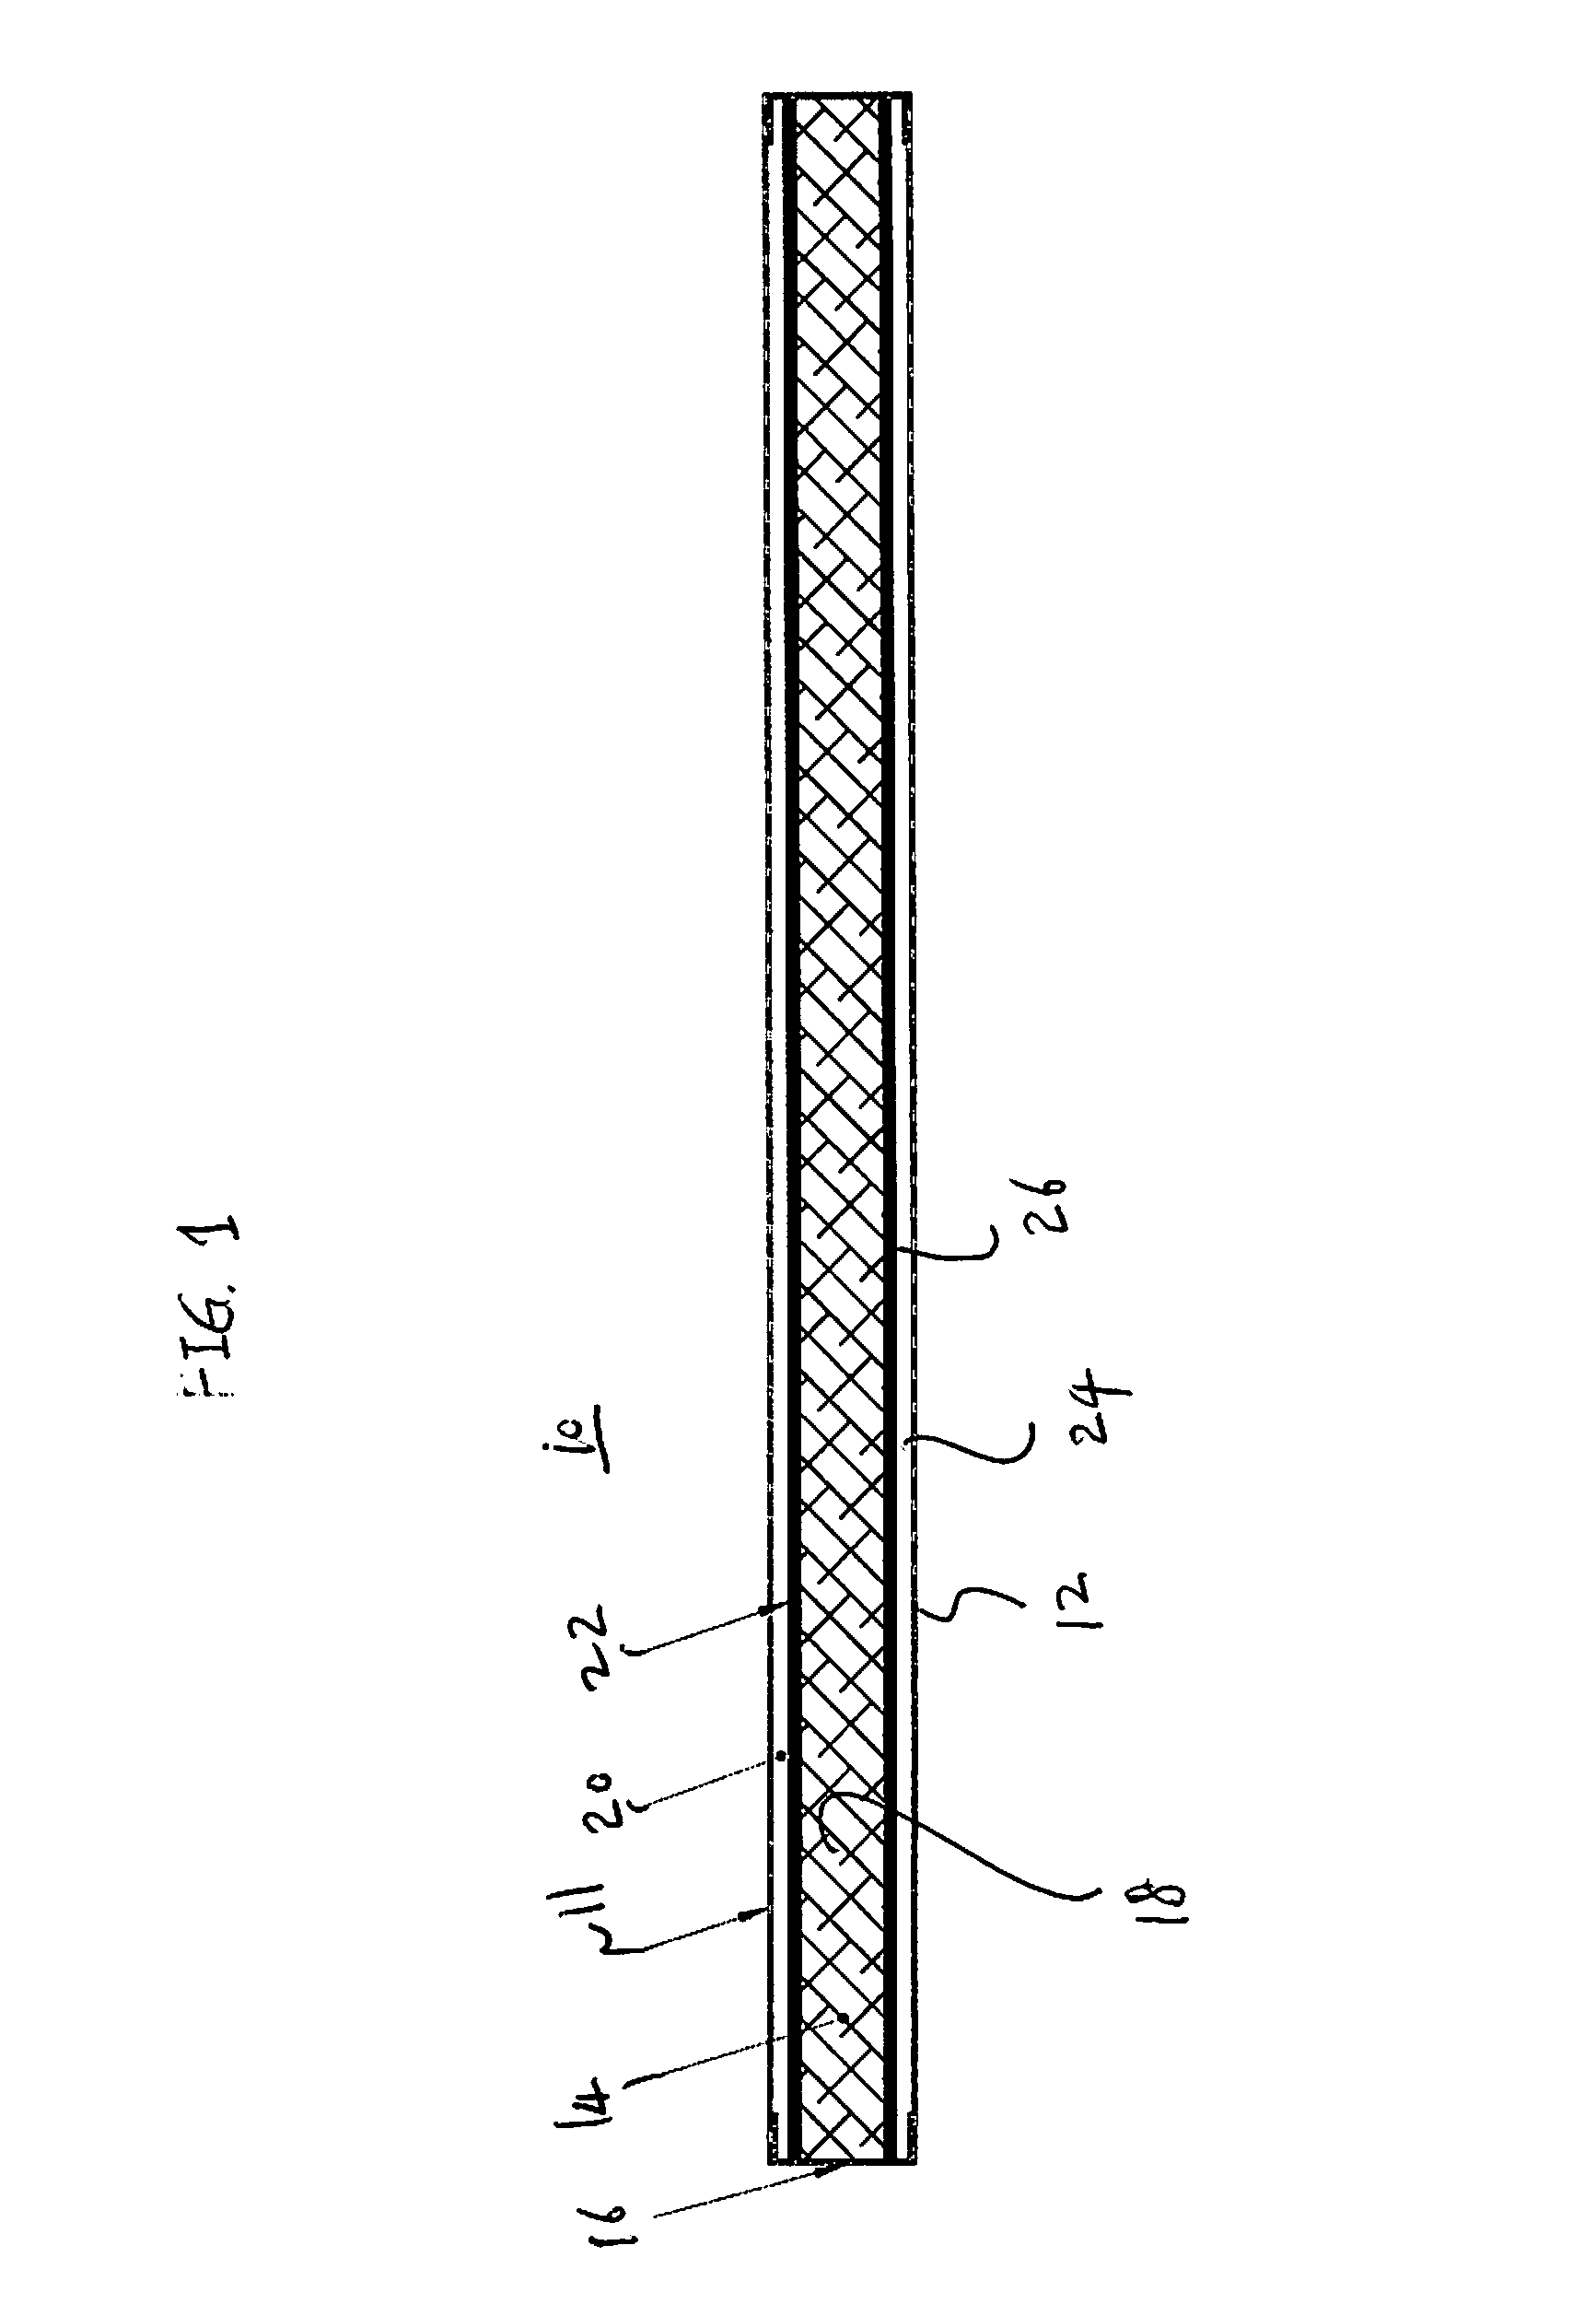 Composite Panel and Method for Strengthening a Door Structure